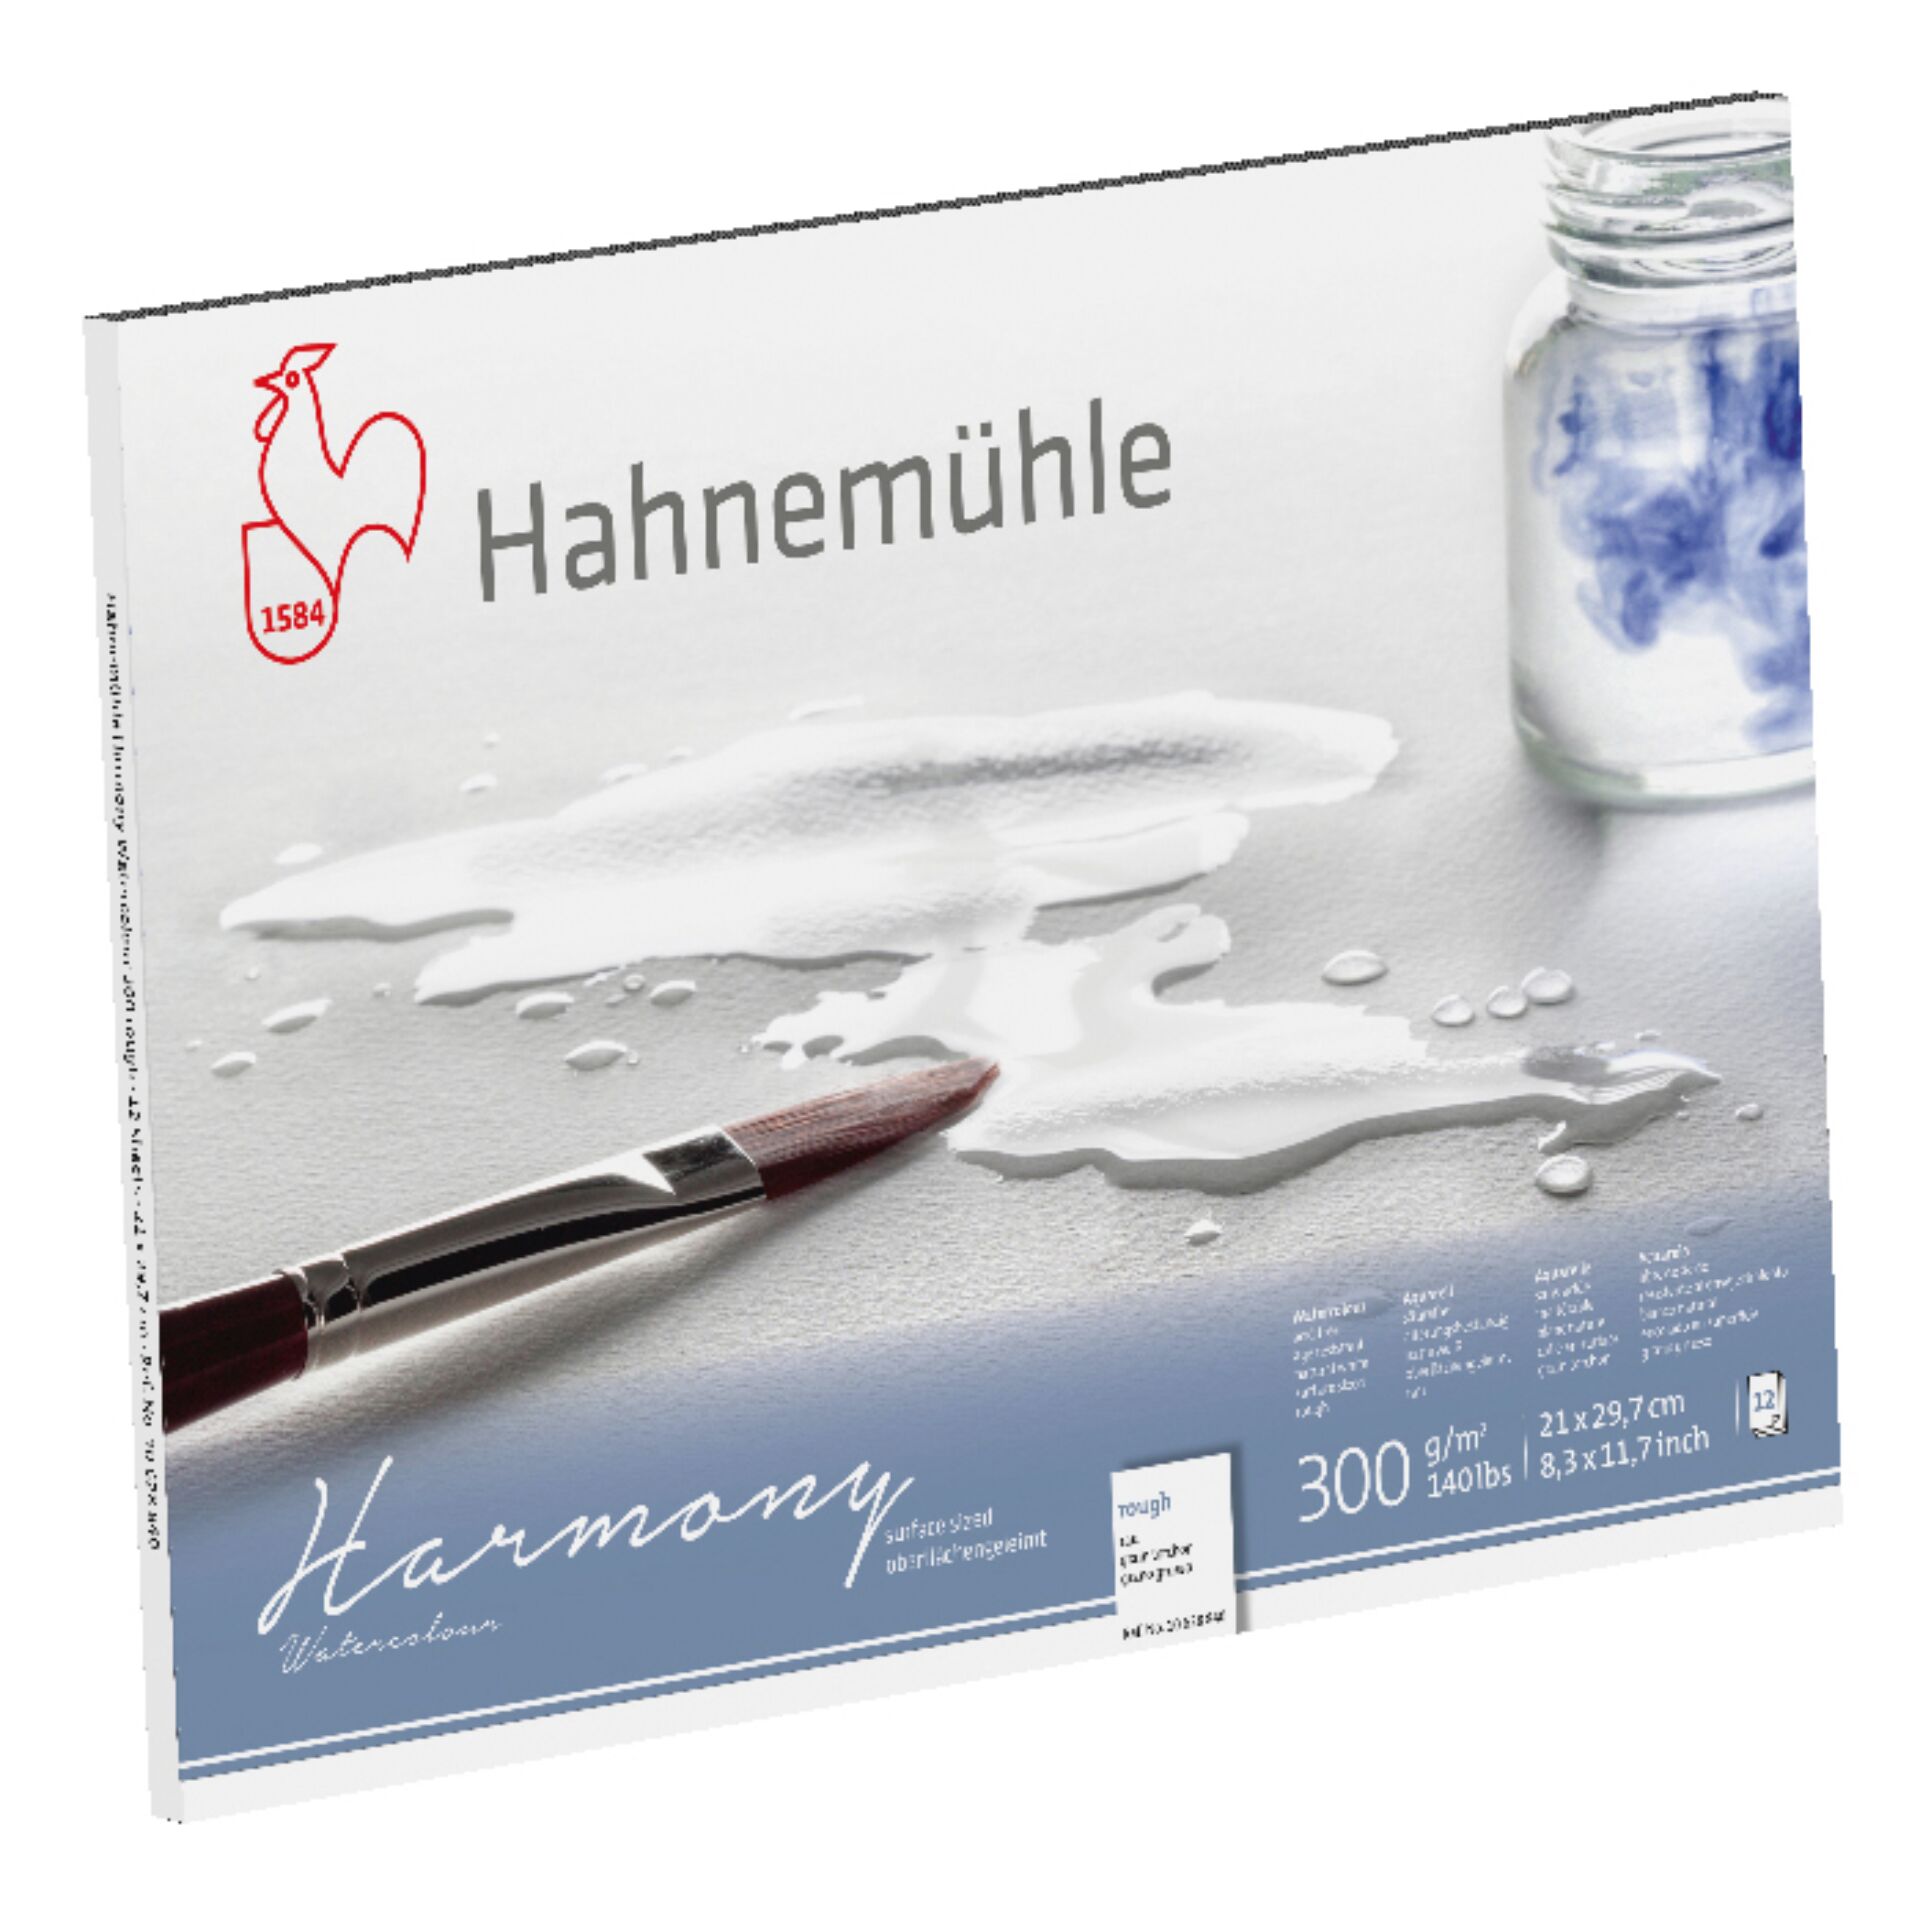 Hahnemühle Harmony Watercolour rough   12 Sheets  300g  A